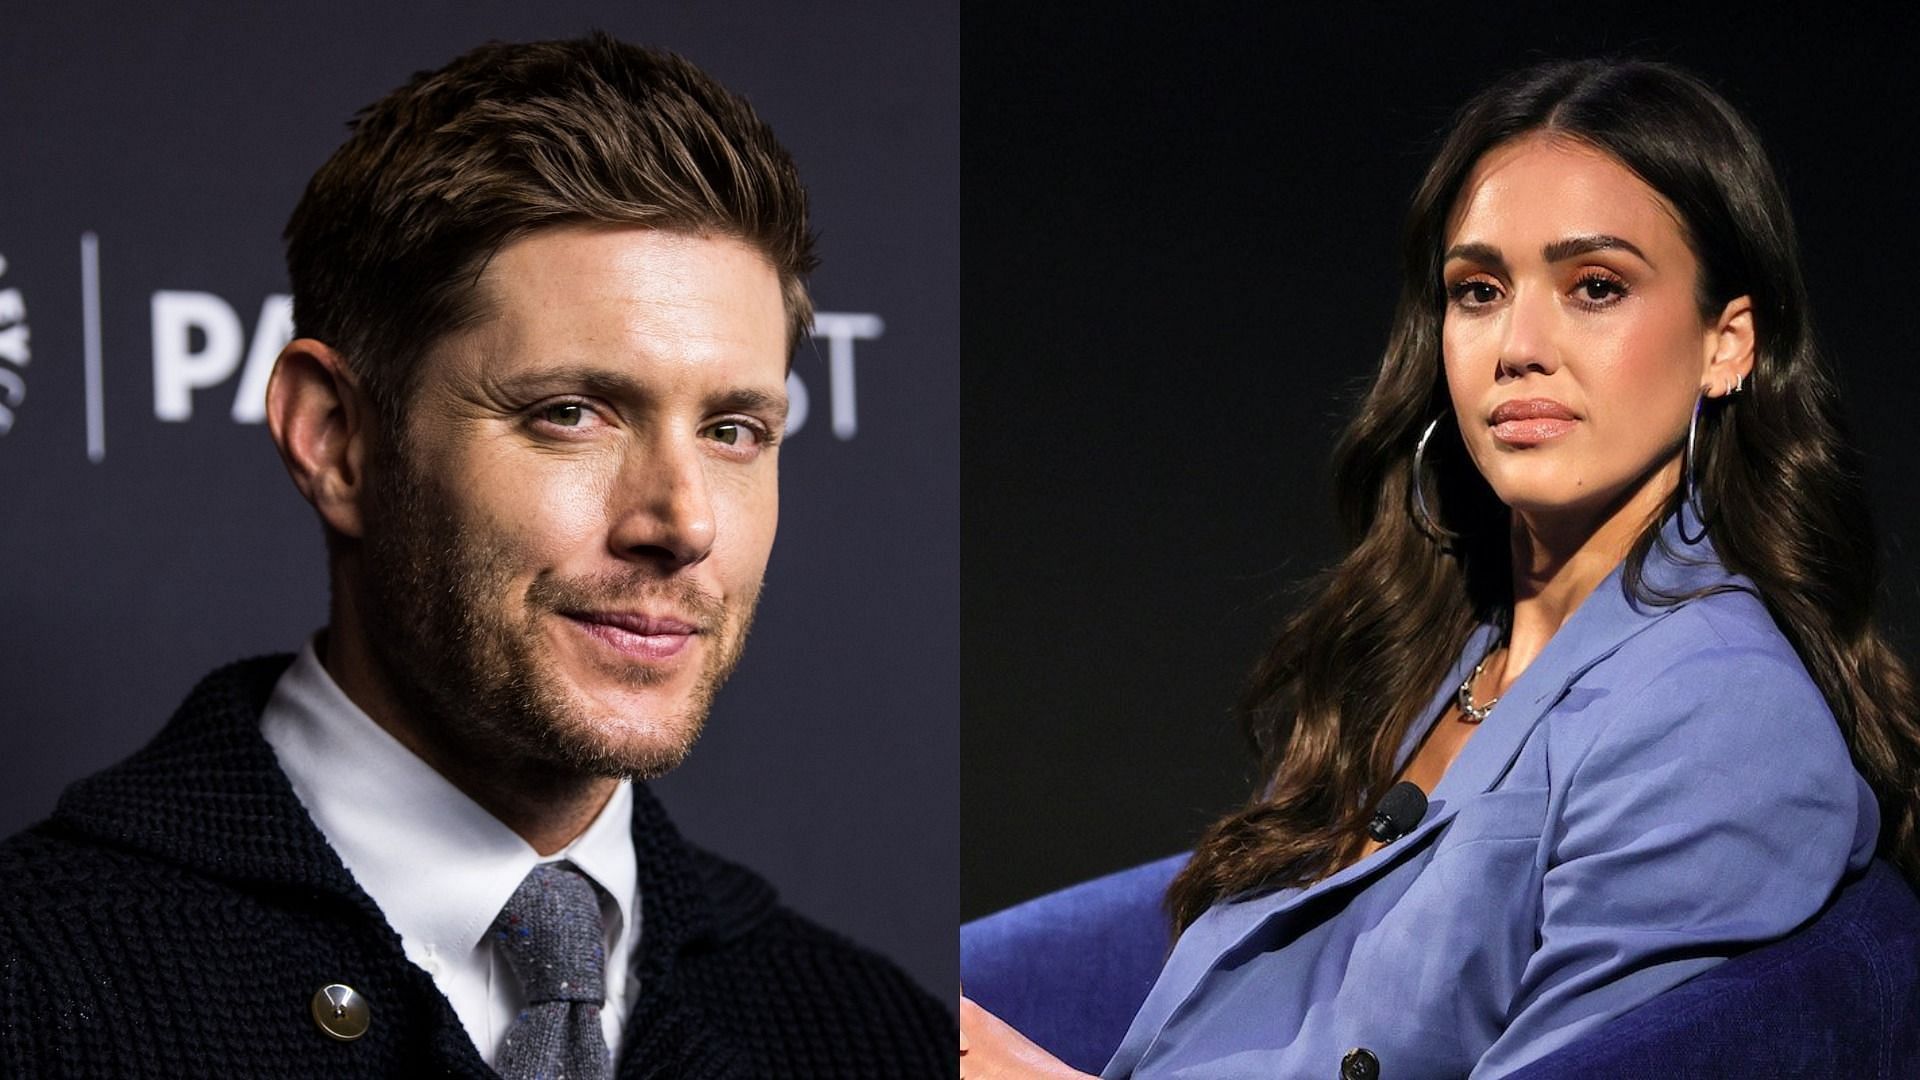 Jensen Ackles said that Jessica Alba and he would bicker on the sets of Dark Angel like a brother and sister (Image via Emma McIntyre/Getty Images and Dia Dipasupil/Getty Images)